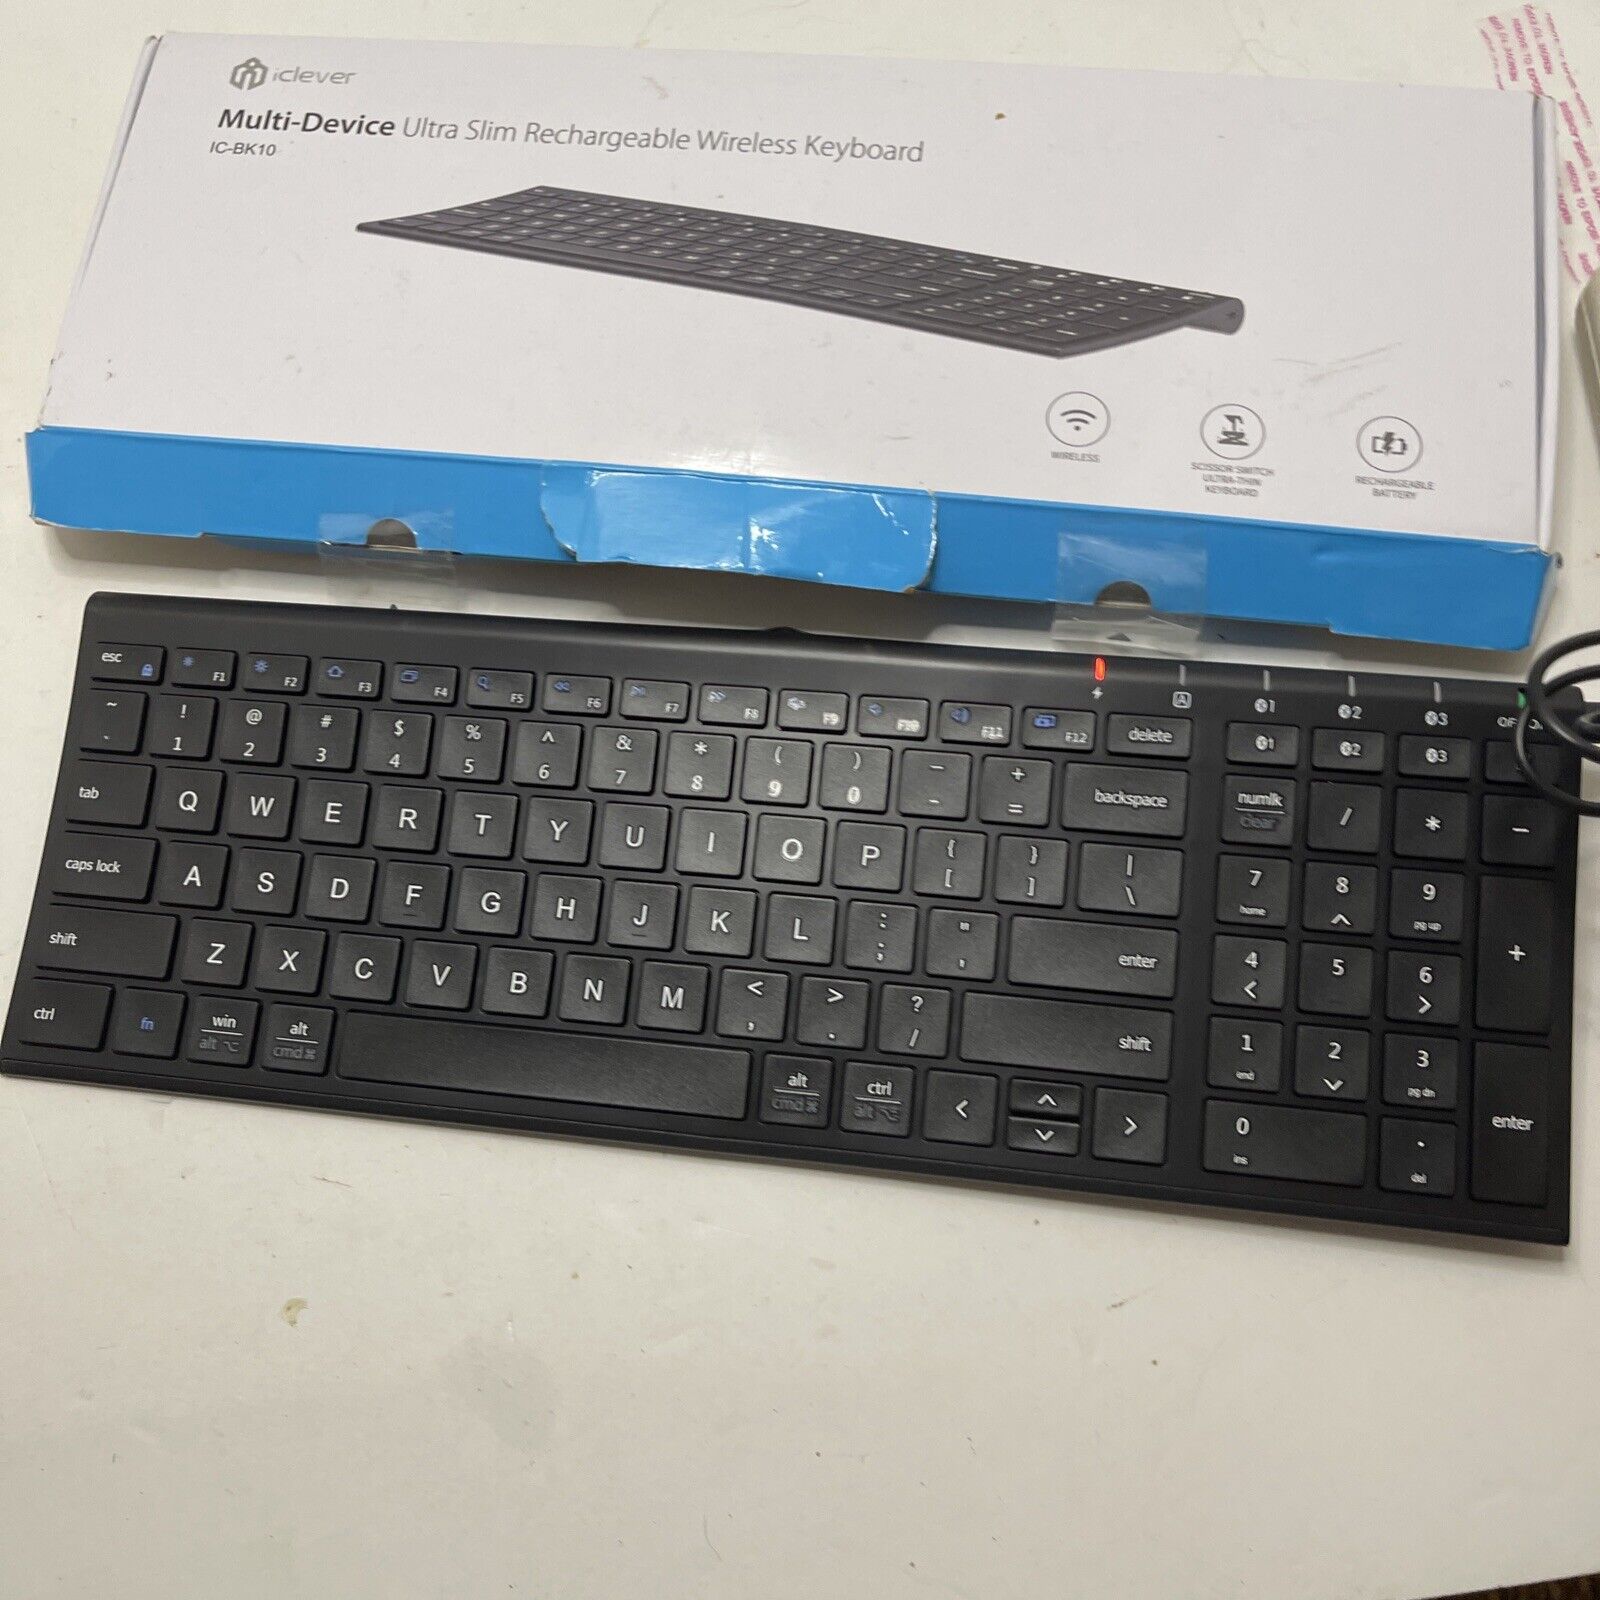 IClever Multi-Device Ultra slim rechargeable wireless keyboard See Description